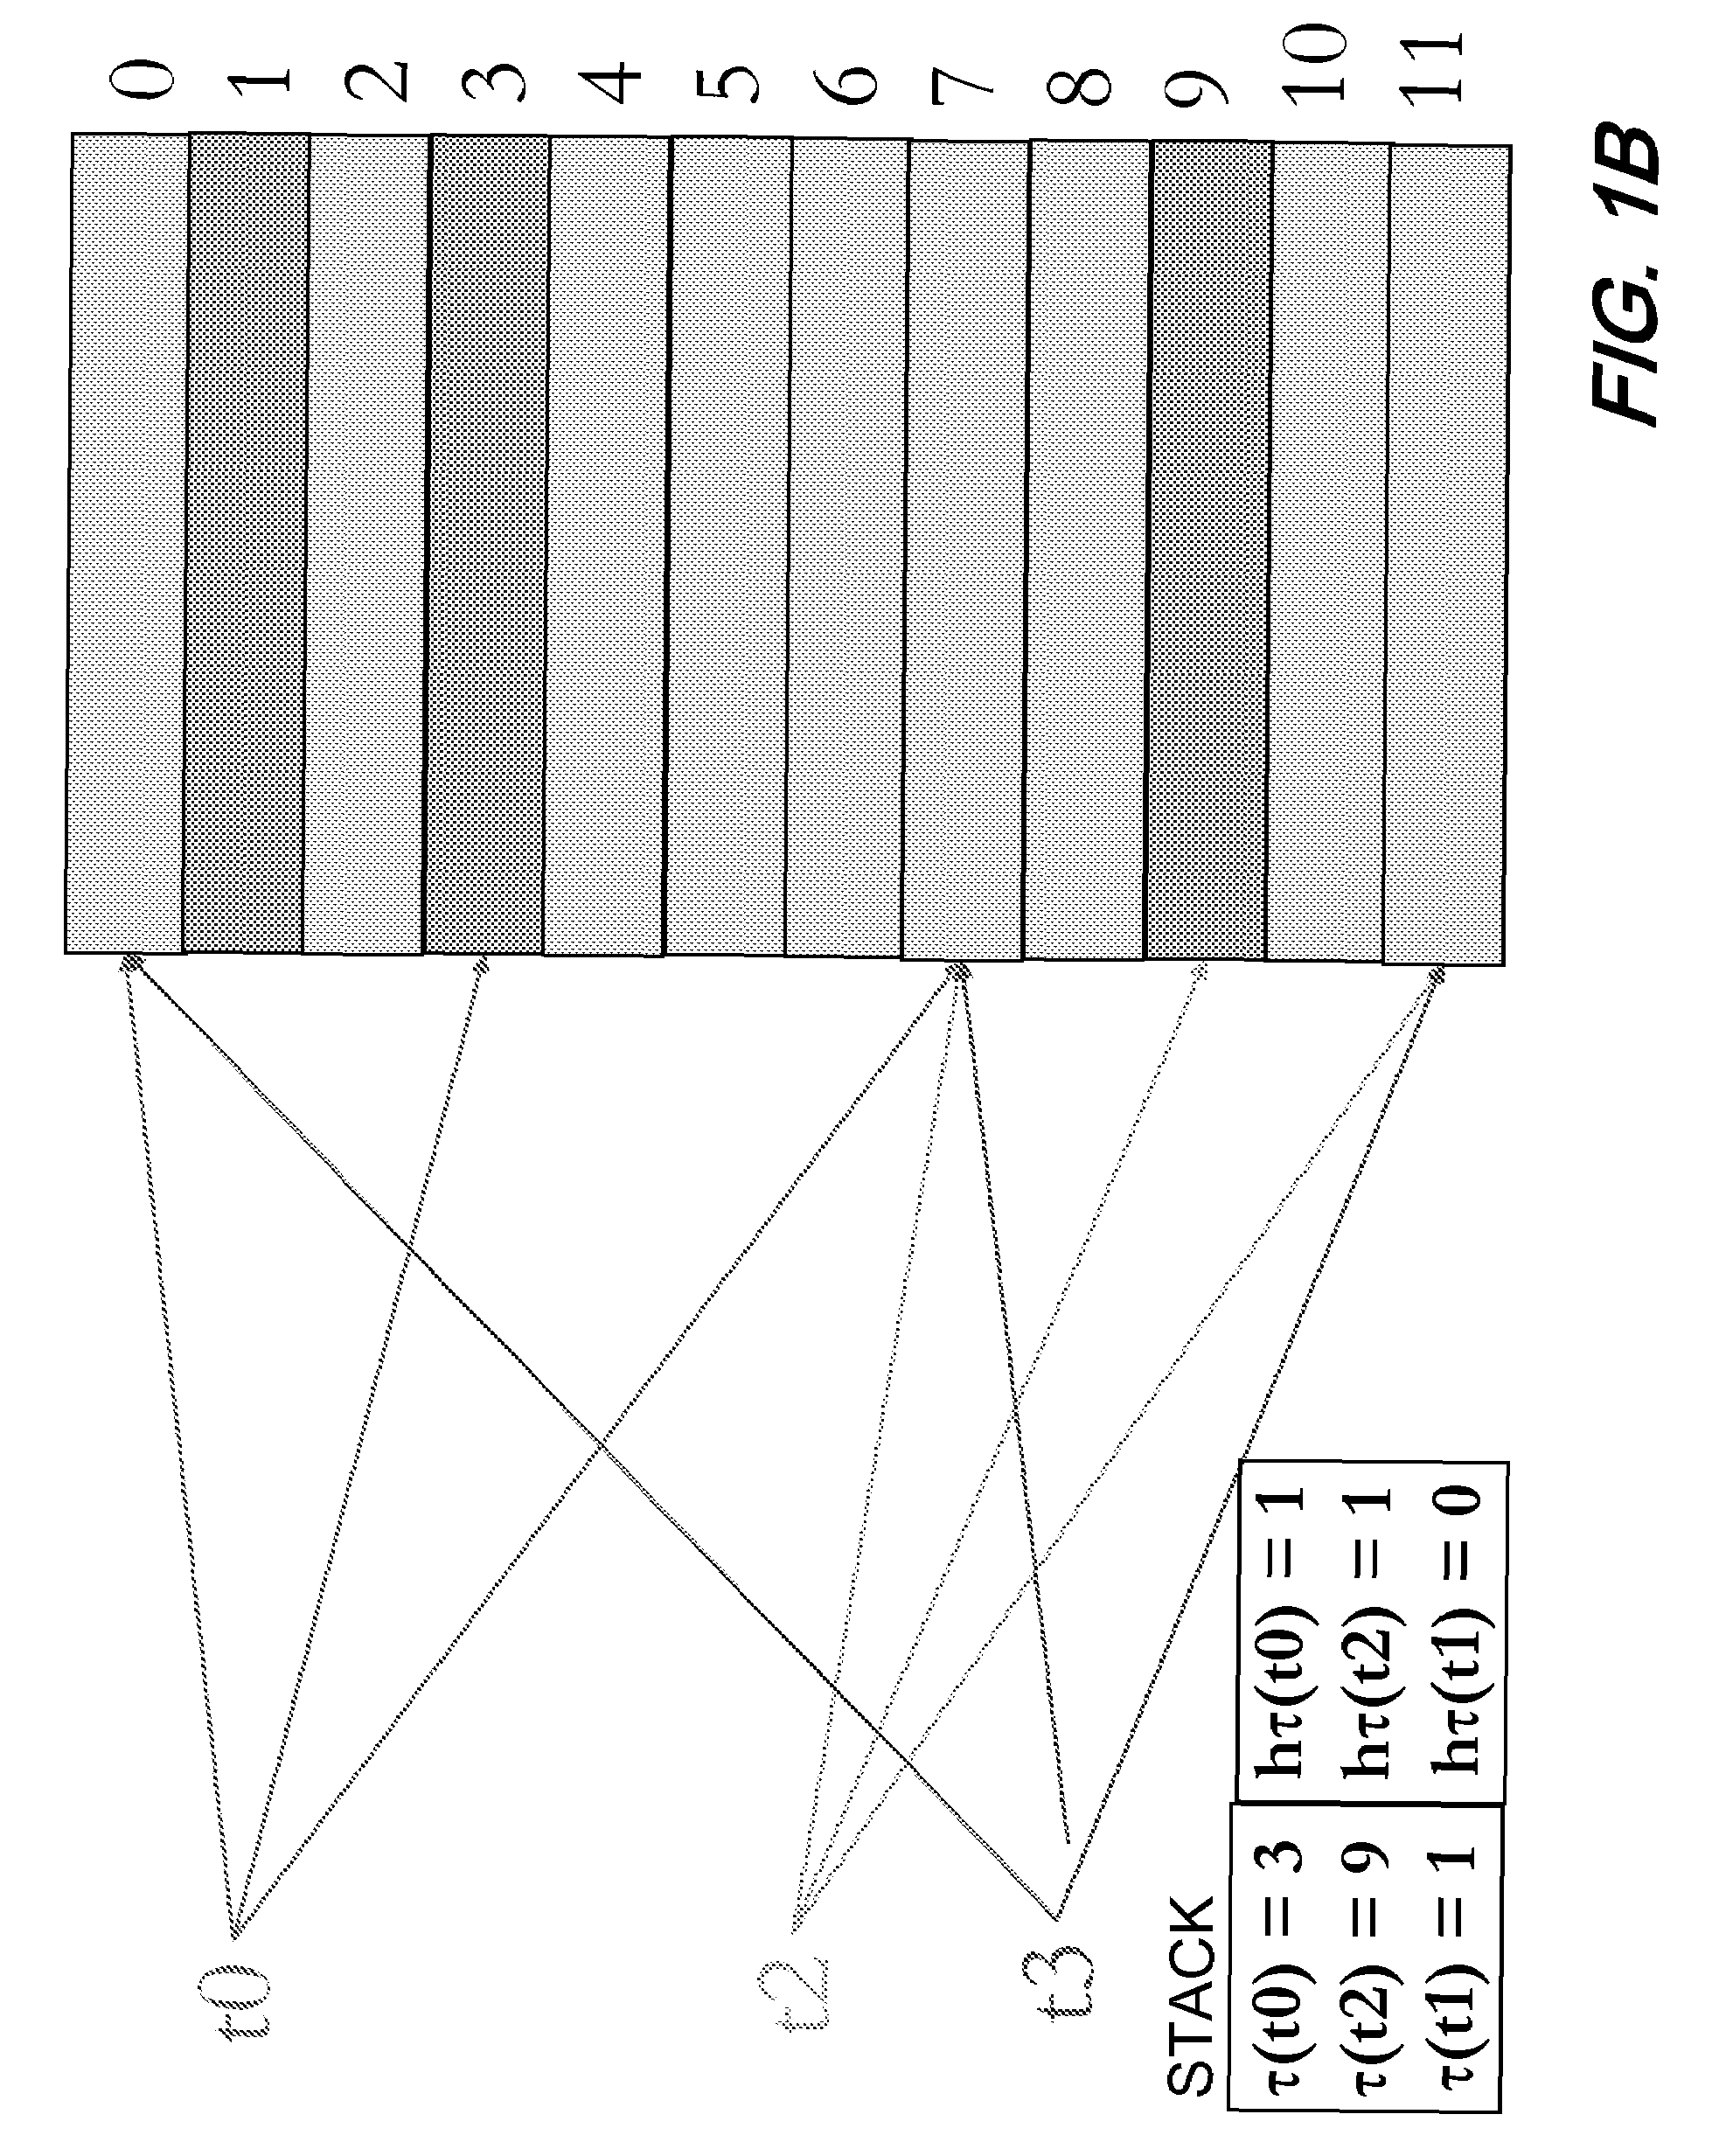 Storage-efficient and collision-free hash-based packet processing architecture and method